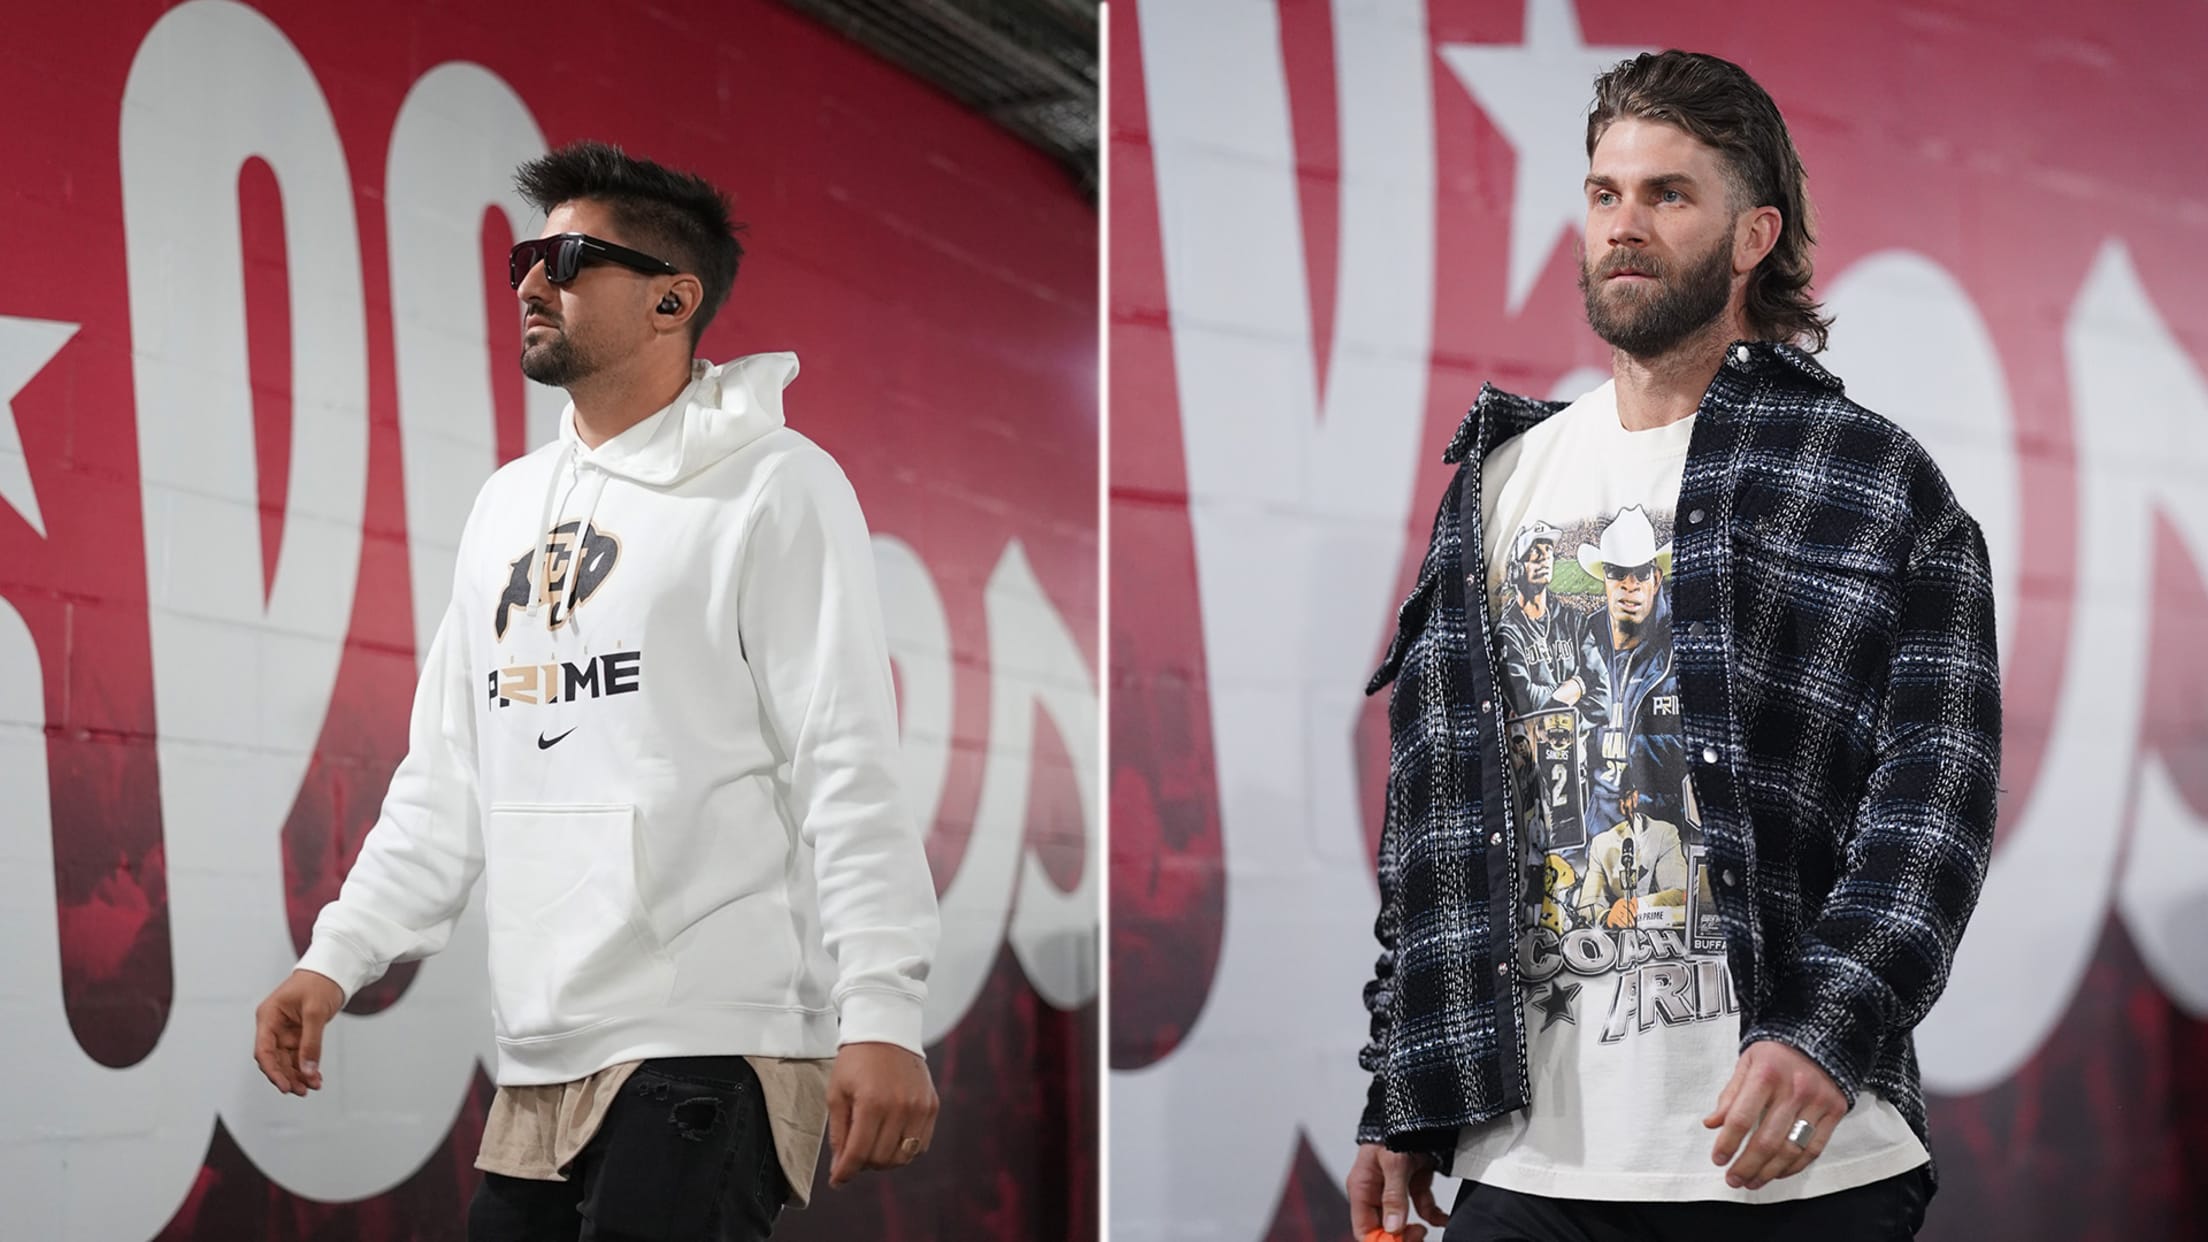 Nick Castellanos and Bryce Harper arrive at the ballpark for Game 3